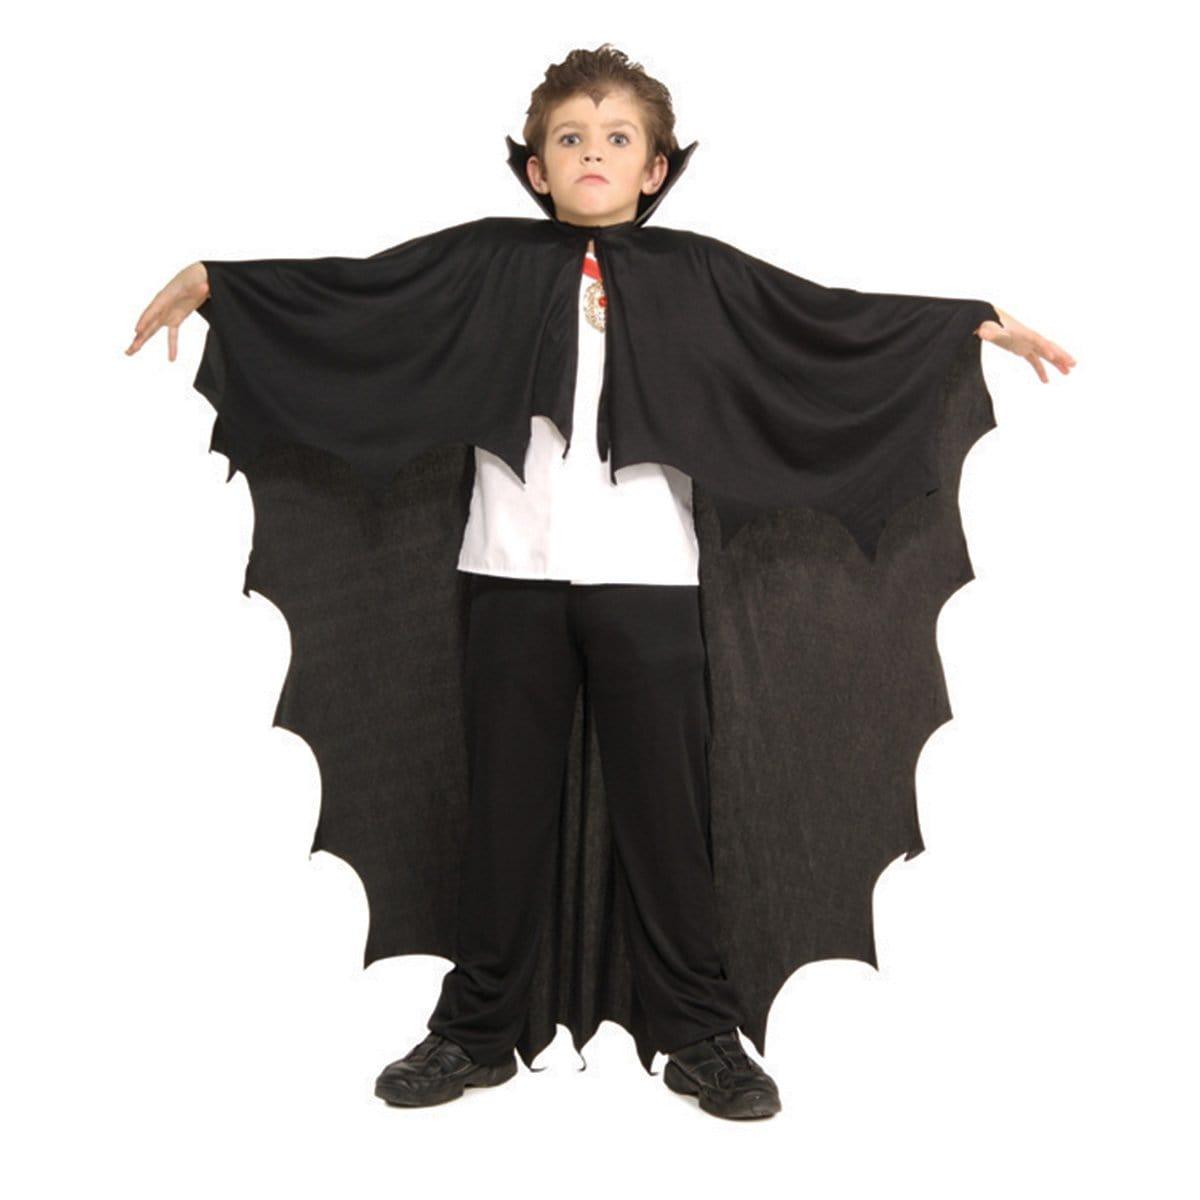 Buy Costume Accessories Black vampire cape for kids sold at Party Expert